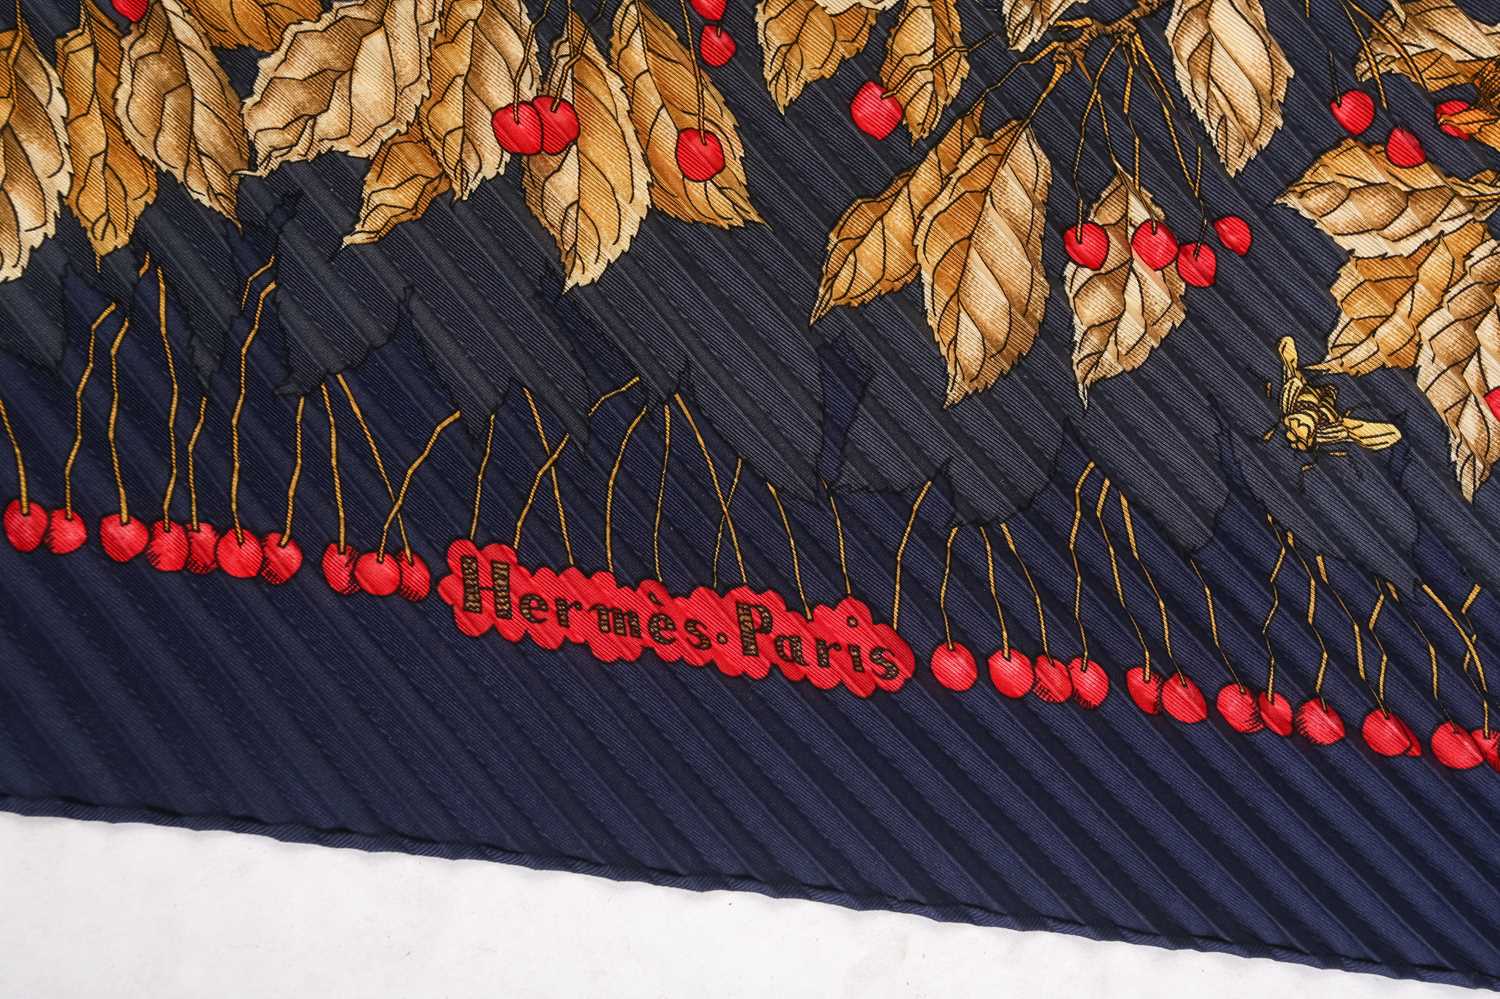 Hermès - 'Les Merises (Cherries)' silk pleated scarf in navy and gold colourway, illustrated with - Image 3 of 6